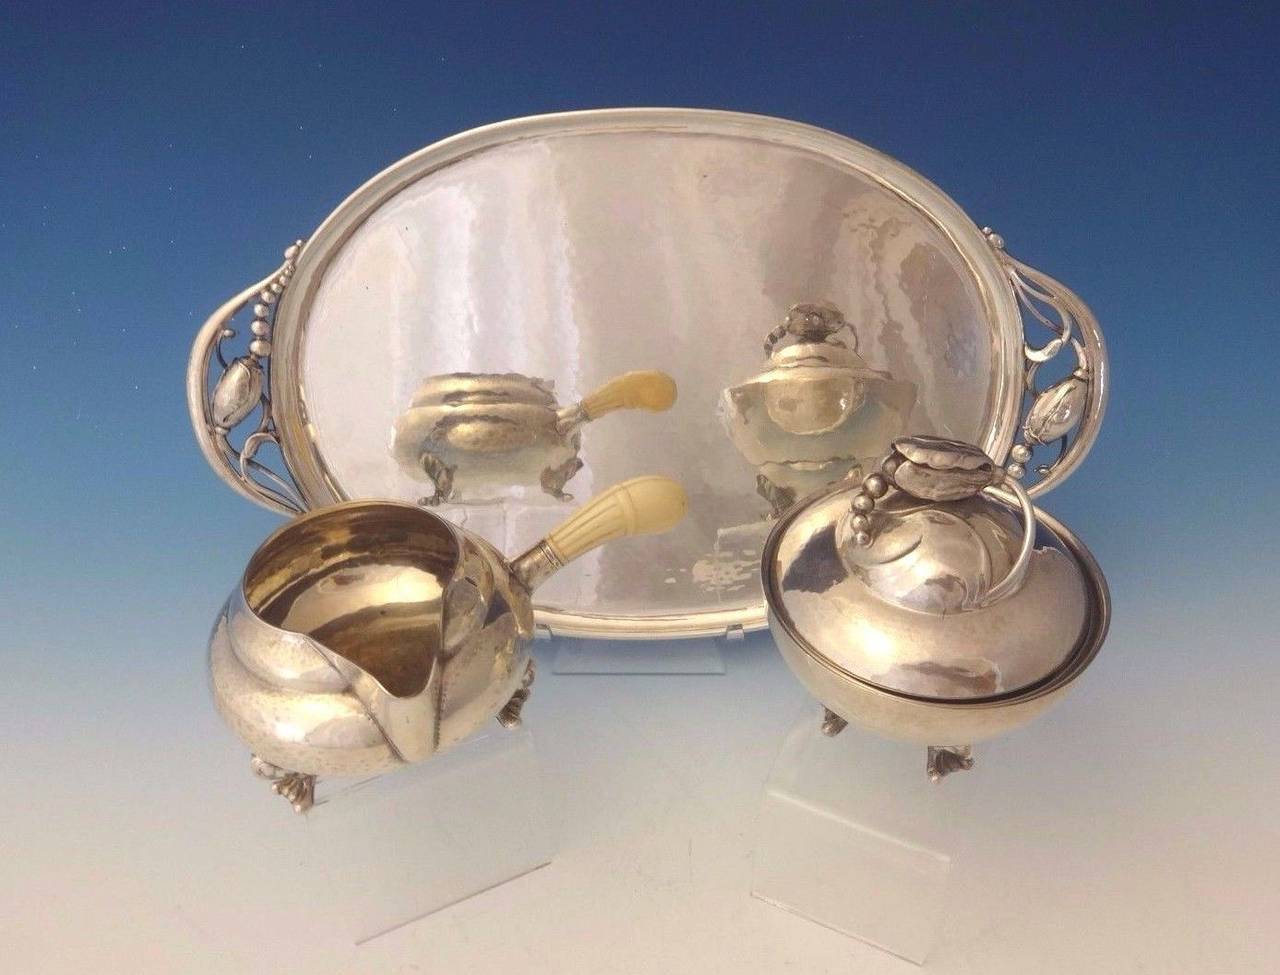 Blossom by Georg Jensen.
This exquisite Blossom by Georg Jensen sterling set includes a sugar bowl, creamer, and a tray with date marks circa in the 1950s. 

Tray: 14" long, 8 1/4" wide, weighs 19.4 ozt and marked with #2H. 
Creamer: 2